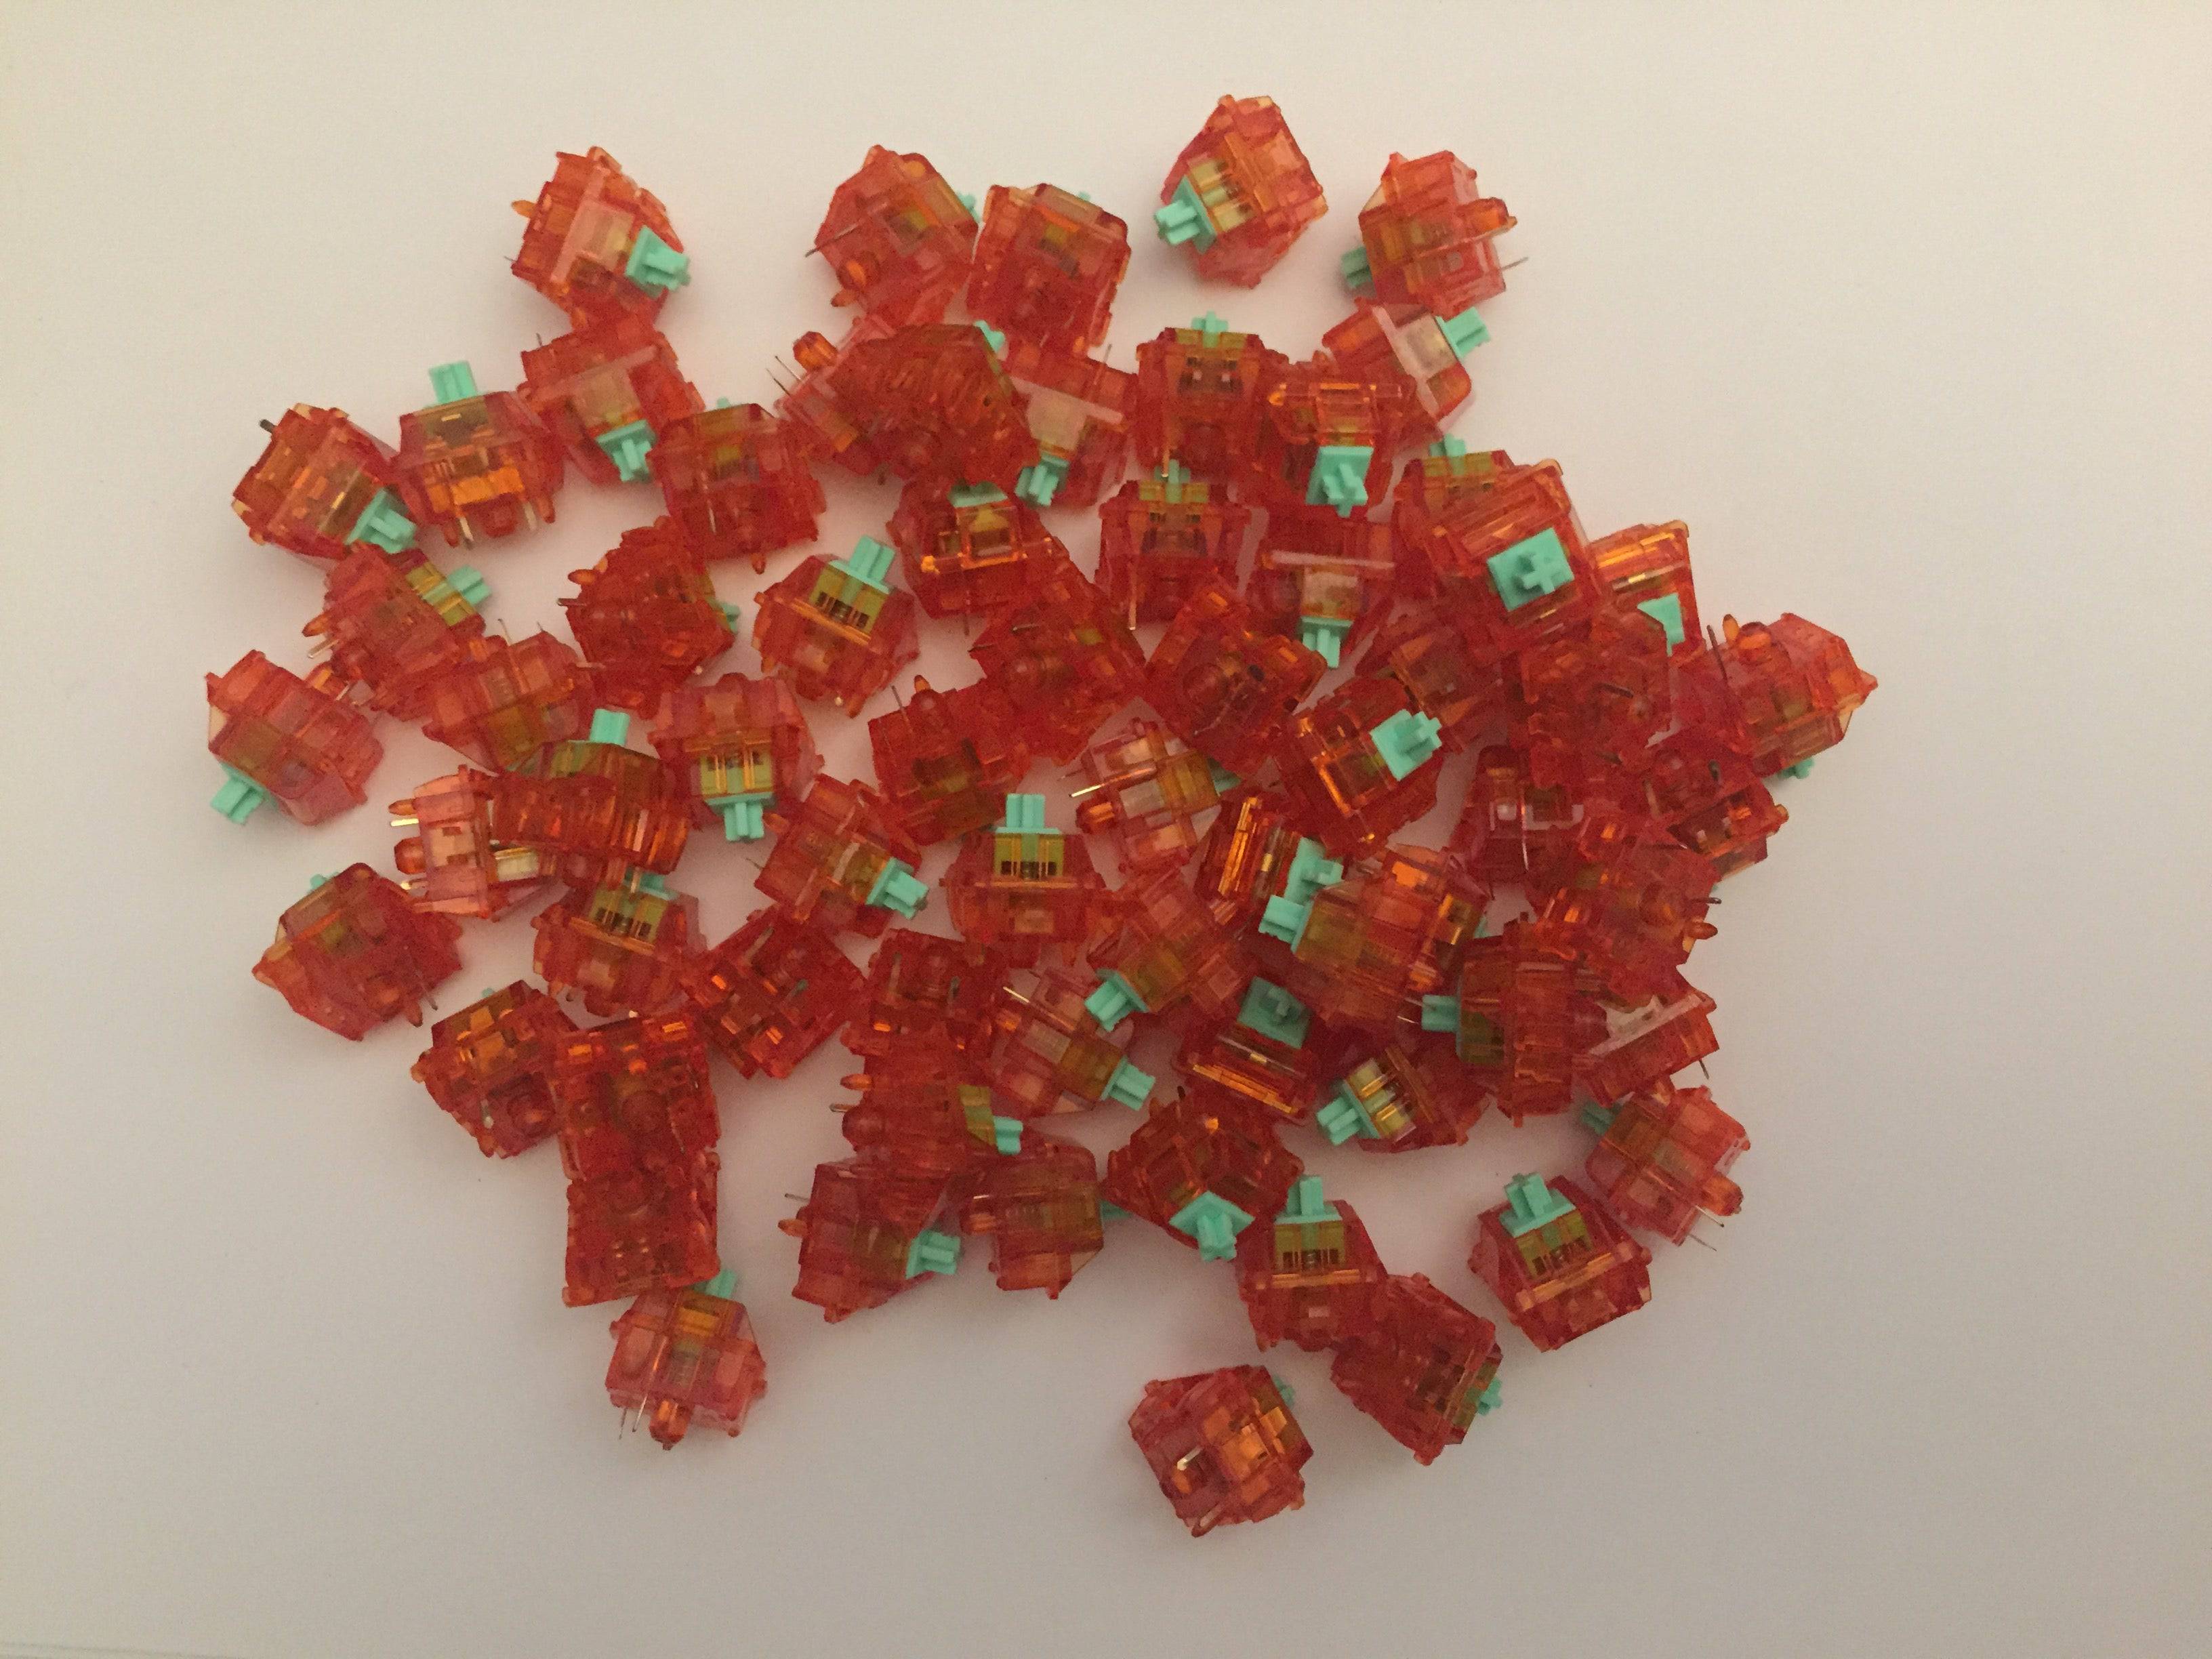 [KFA MARKETPLACE] 70 Lubed C³Equalz Tangerine v2 Switches (62g) - KeebsForAll